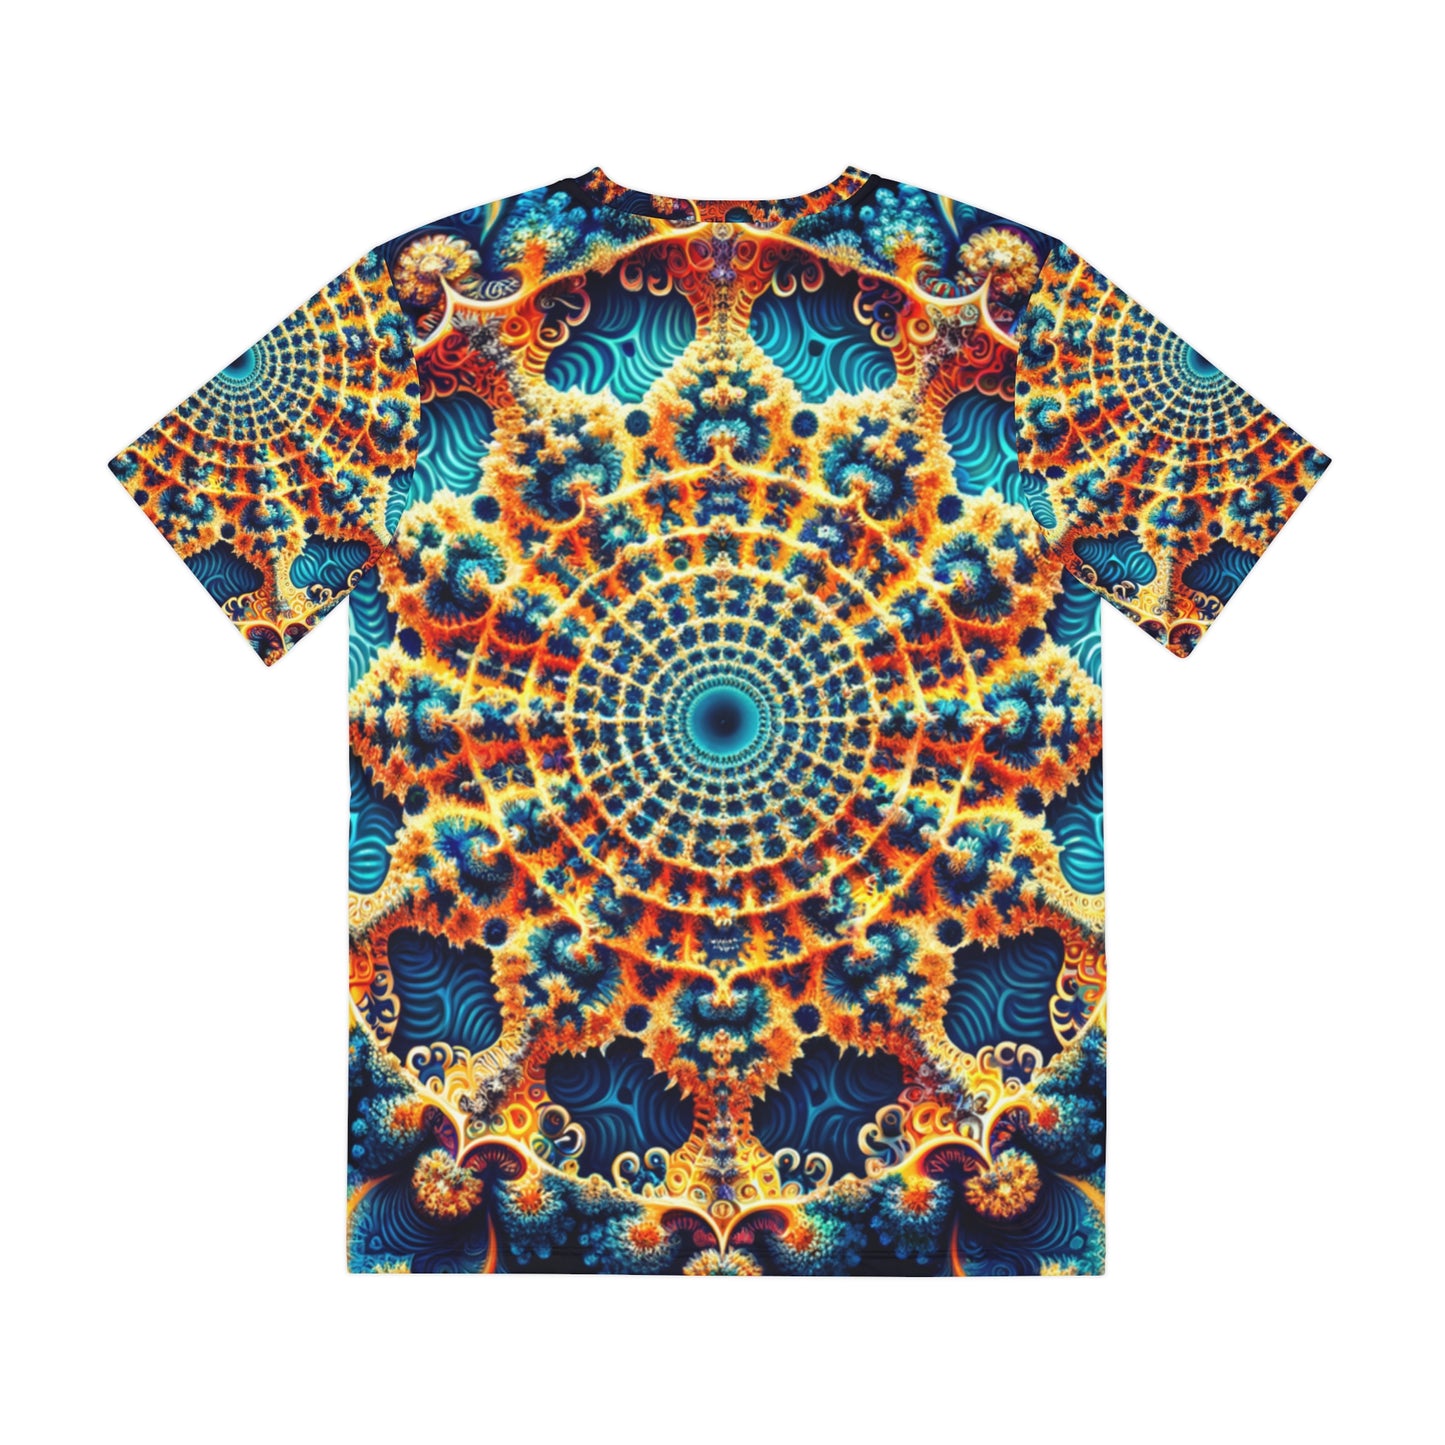 Back view of the Azurite Mandala Bloom Crewneck Pullover All-Over Print Short-Sleeved Shirt blue yellow red white mandala pattern